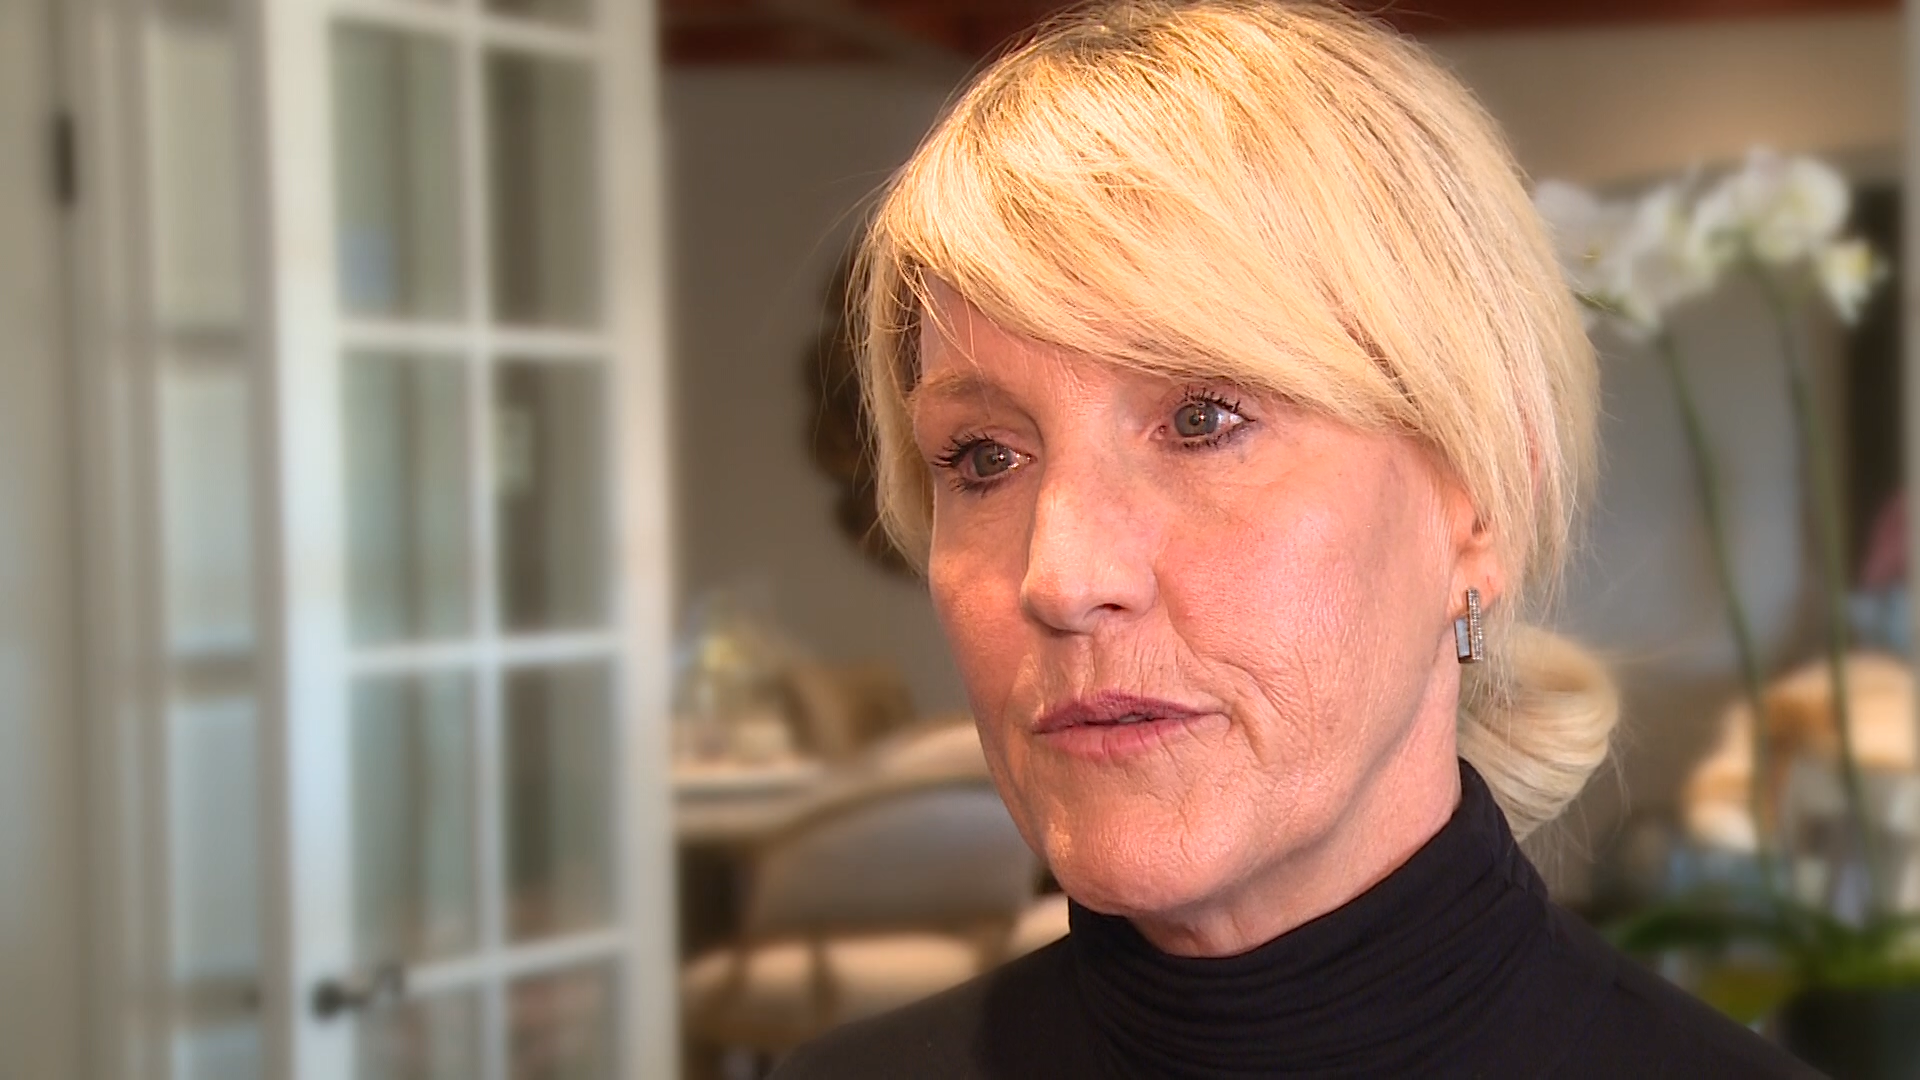 The Defenders spoke exclusively with famed environmental activist Erin Brockovich, who says her team is investigating the Duke Energy coal ash.